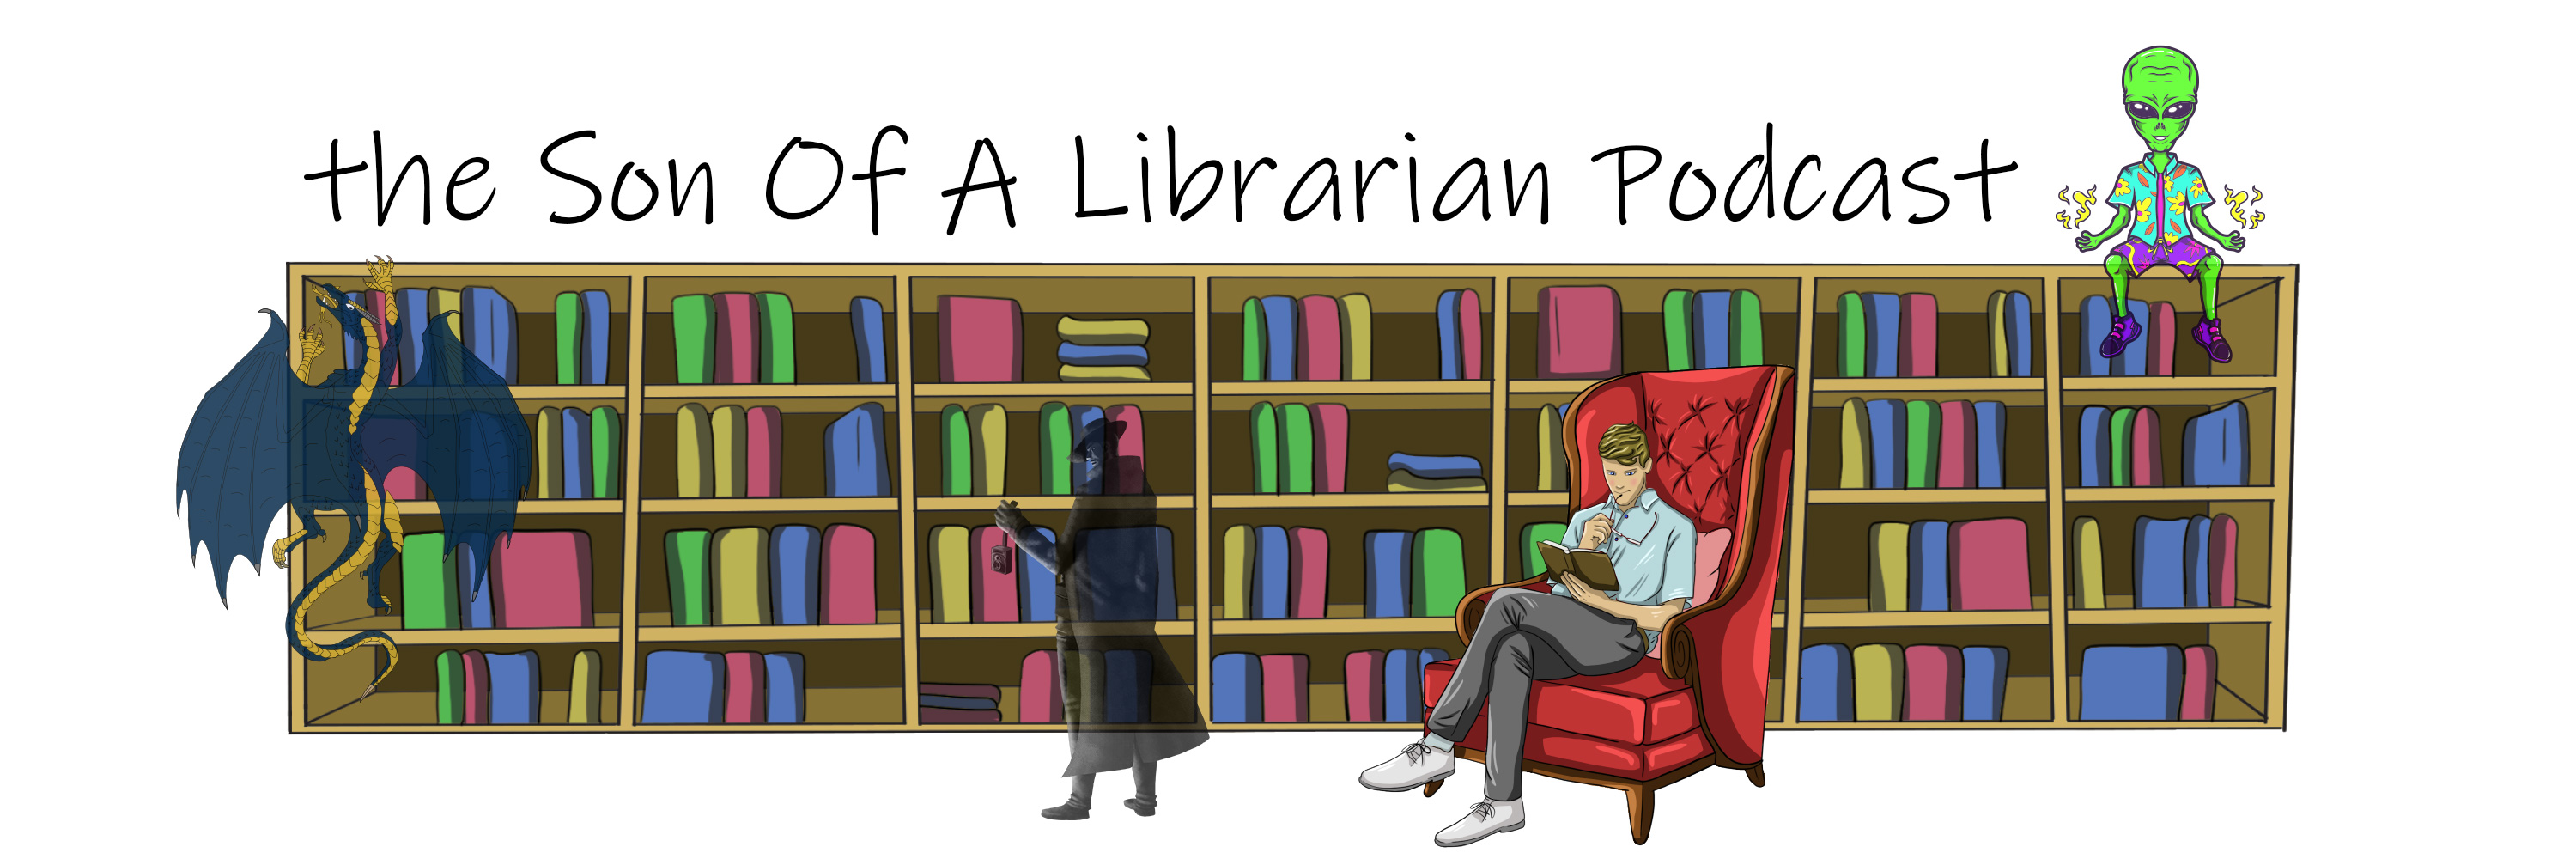 Son Of A Librarian Podcast